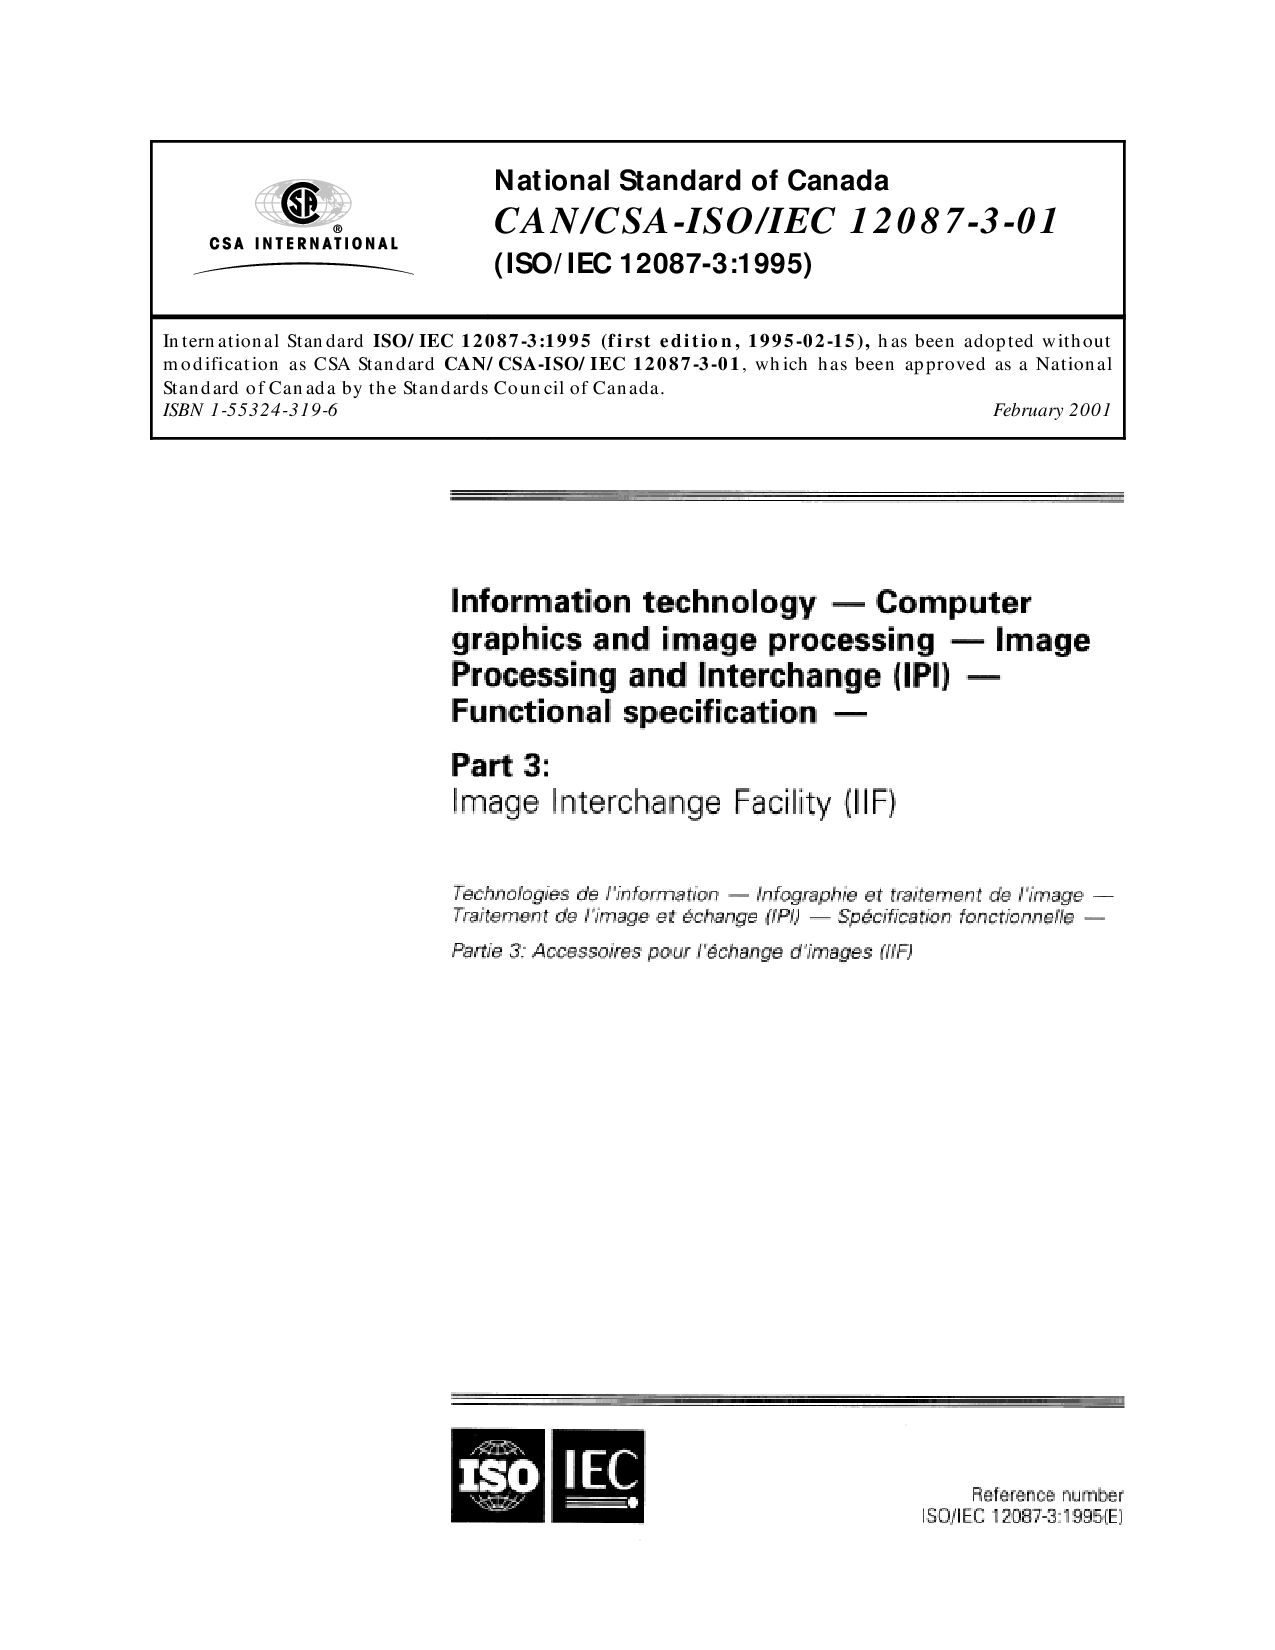 CAN/CSA-ISO/IEC 12087-3:2001